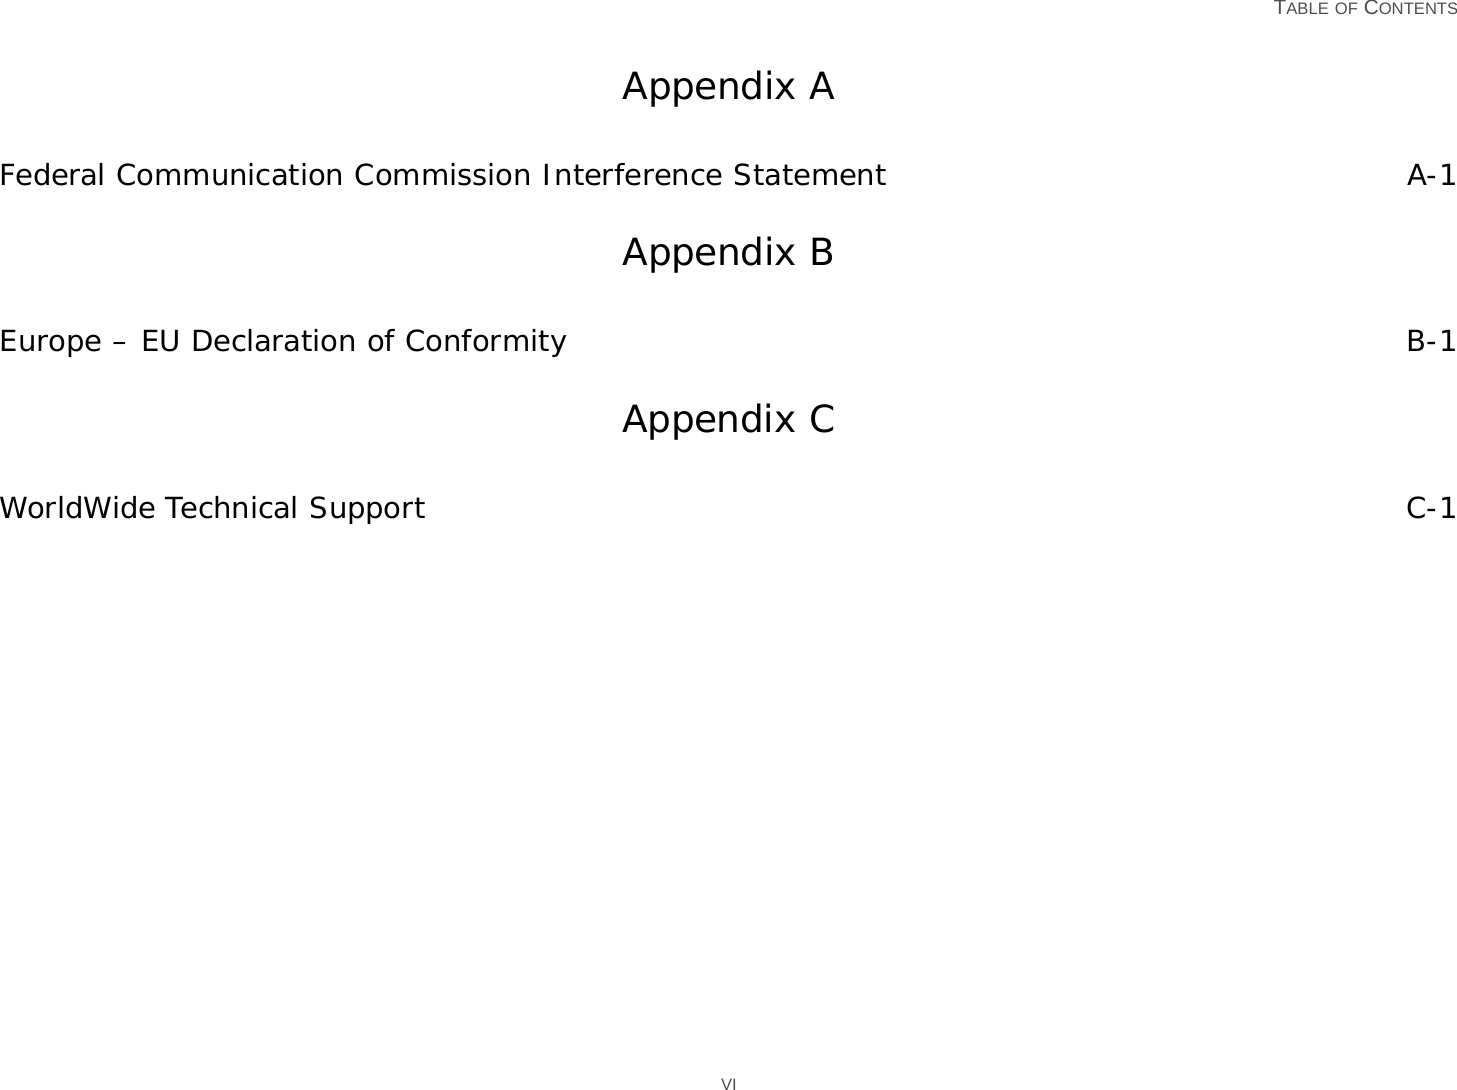   TABLE OF CONTENTS VIAppendix AFederal Communication Commission Interference Statement A-1Appendix BEurope – EU Declaration of Conformity B-1Appendix CWorldWide Technical Support C-1